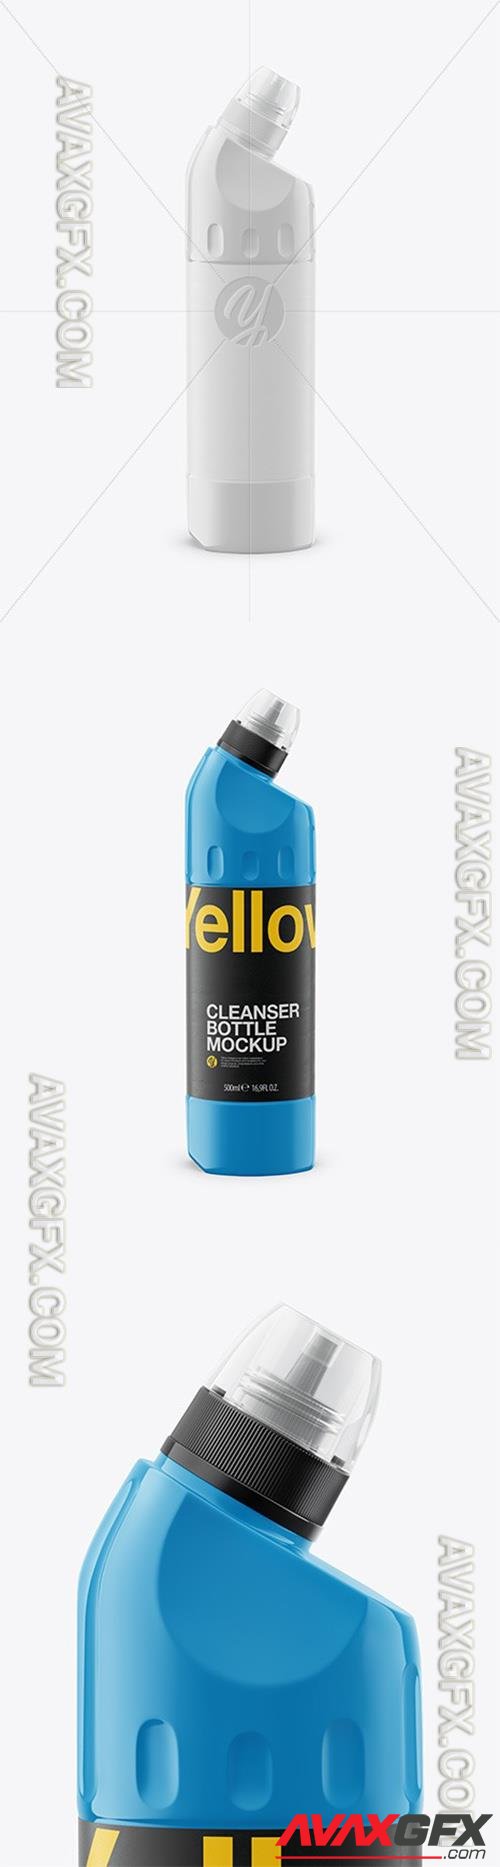 500ml Glossy Plastic Toilet Bowl Cleaner Bottle Mockup - Front View 48007 TIF